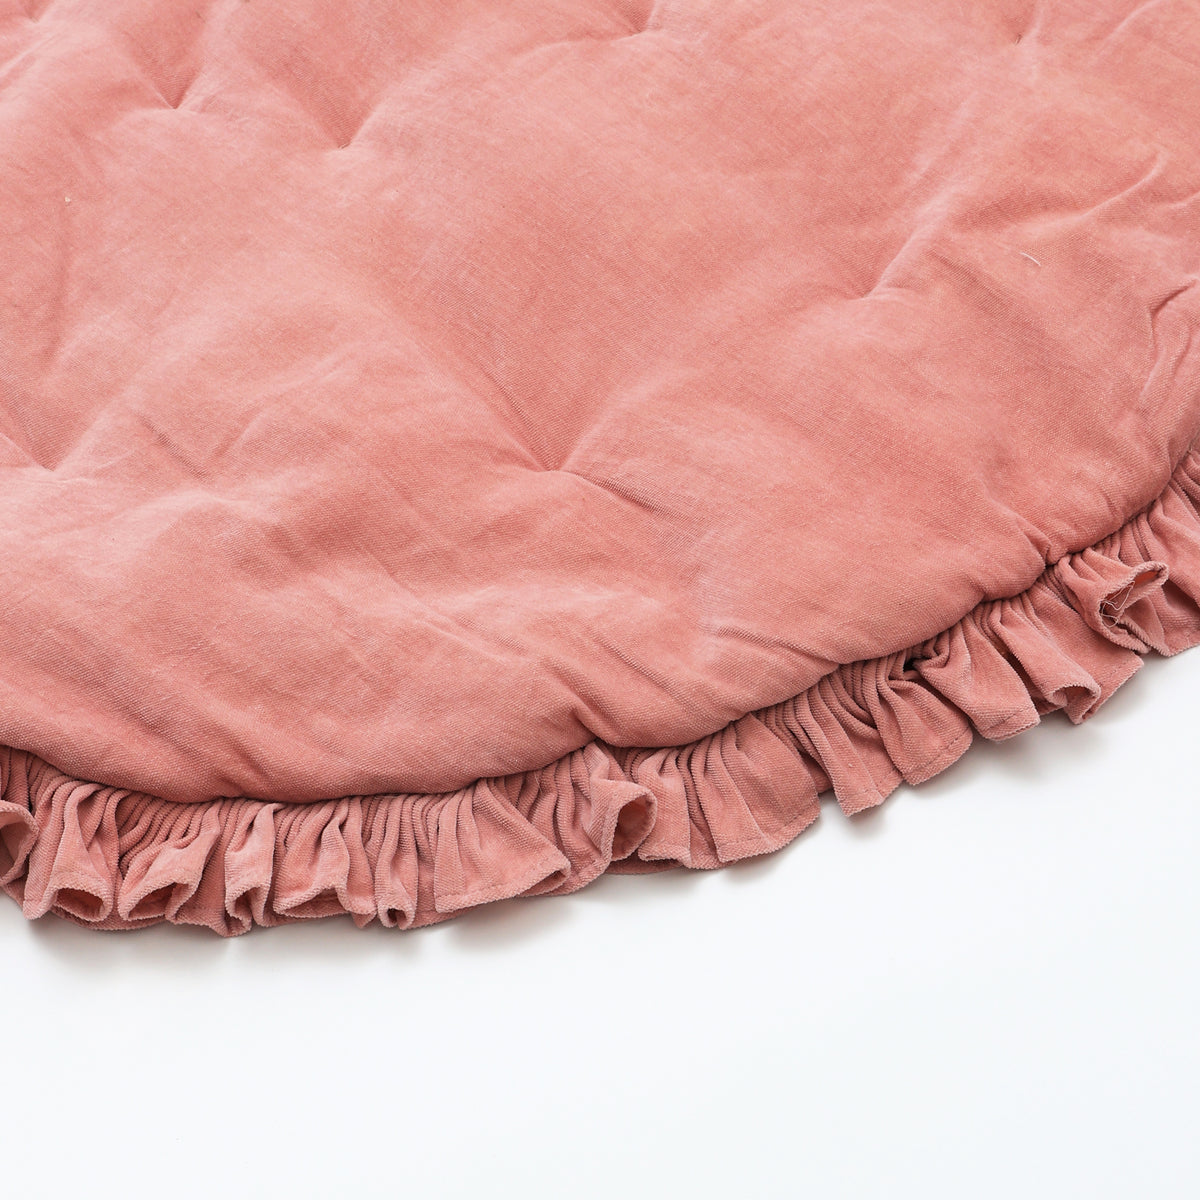 Cotton Soft & Fine Velvet Rounded Playmat with Frill (Pink)